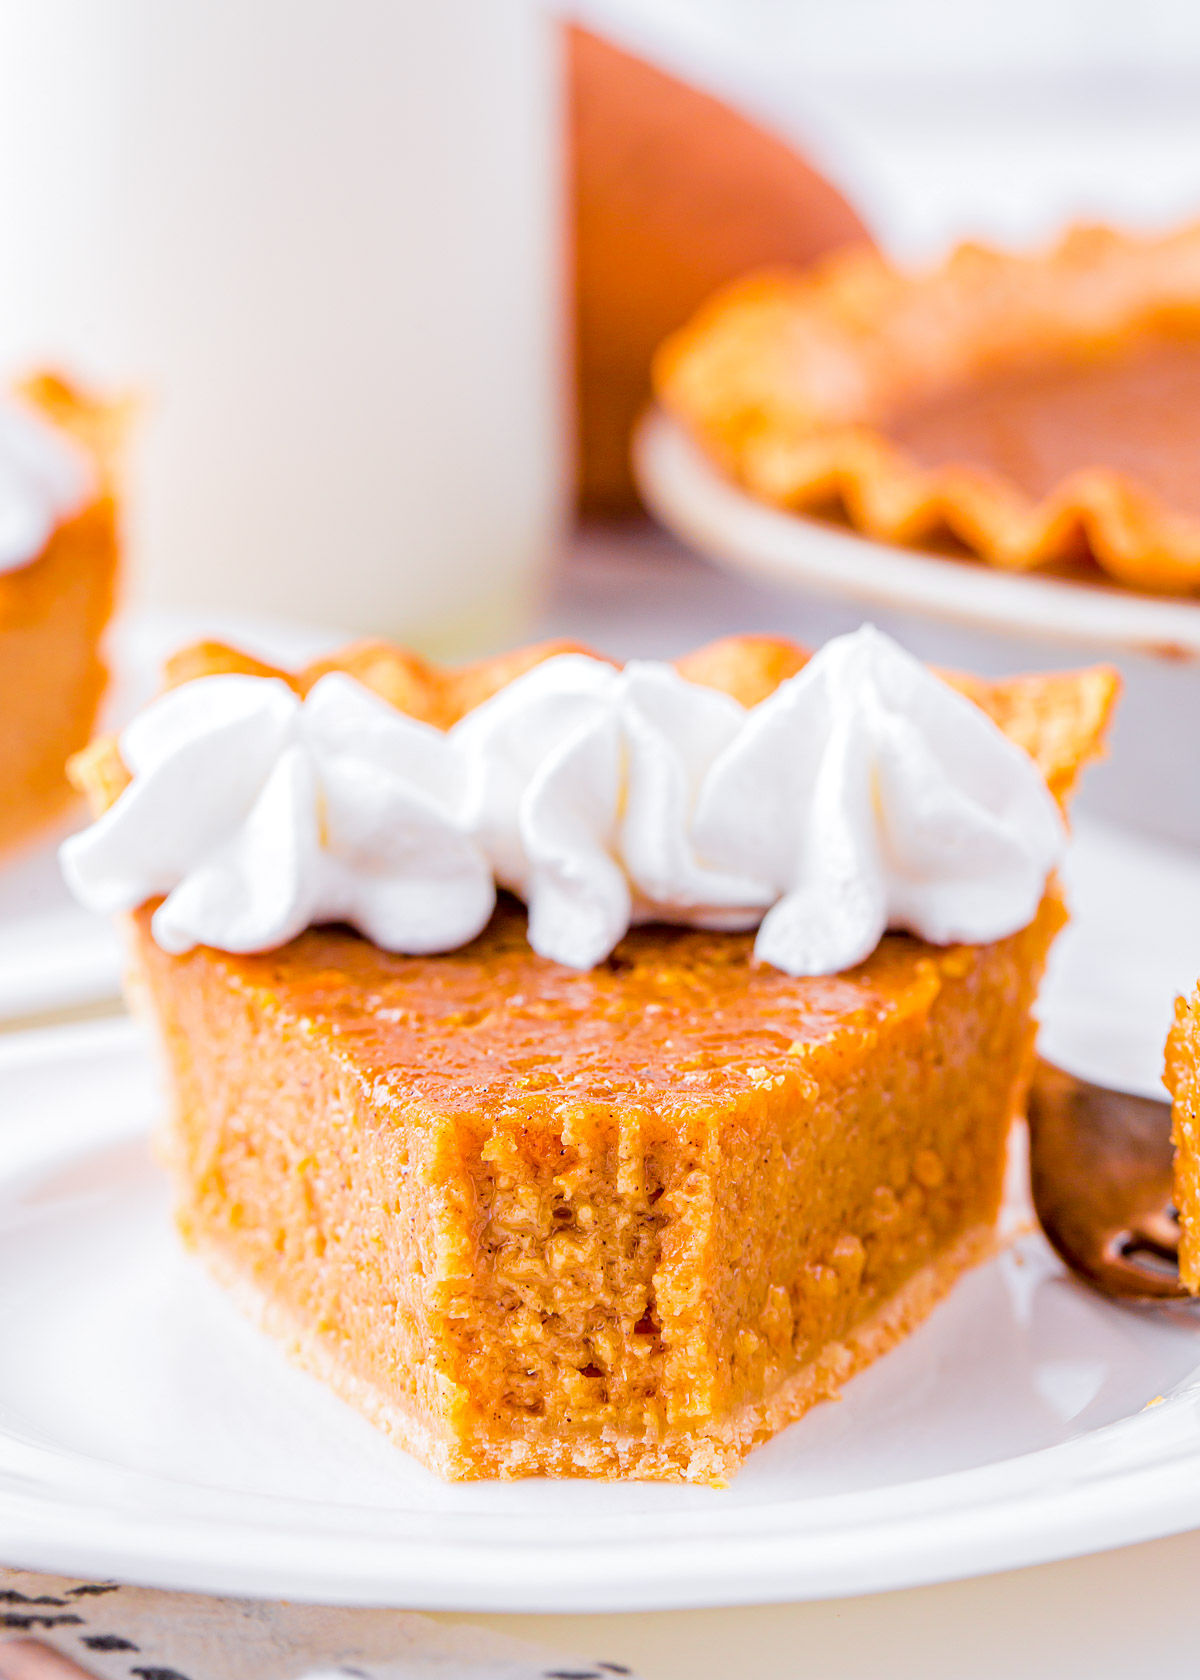 slice of sweet potato pie on white plate topped with whipped cream. the rest of the pie is in the background.